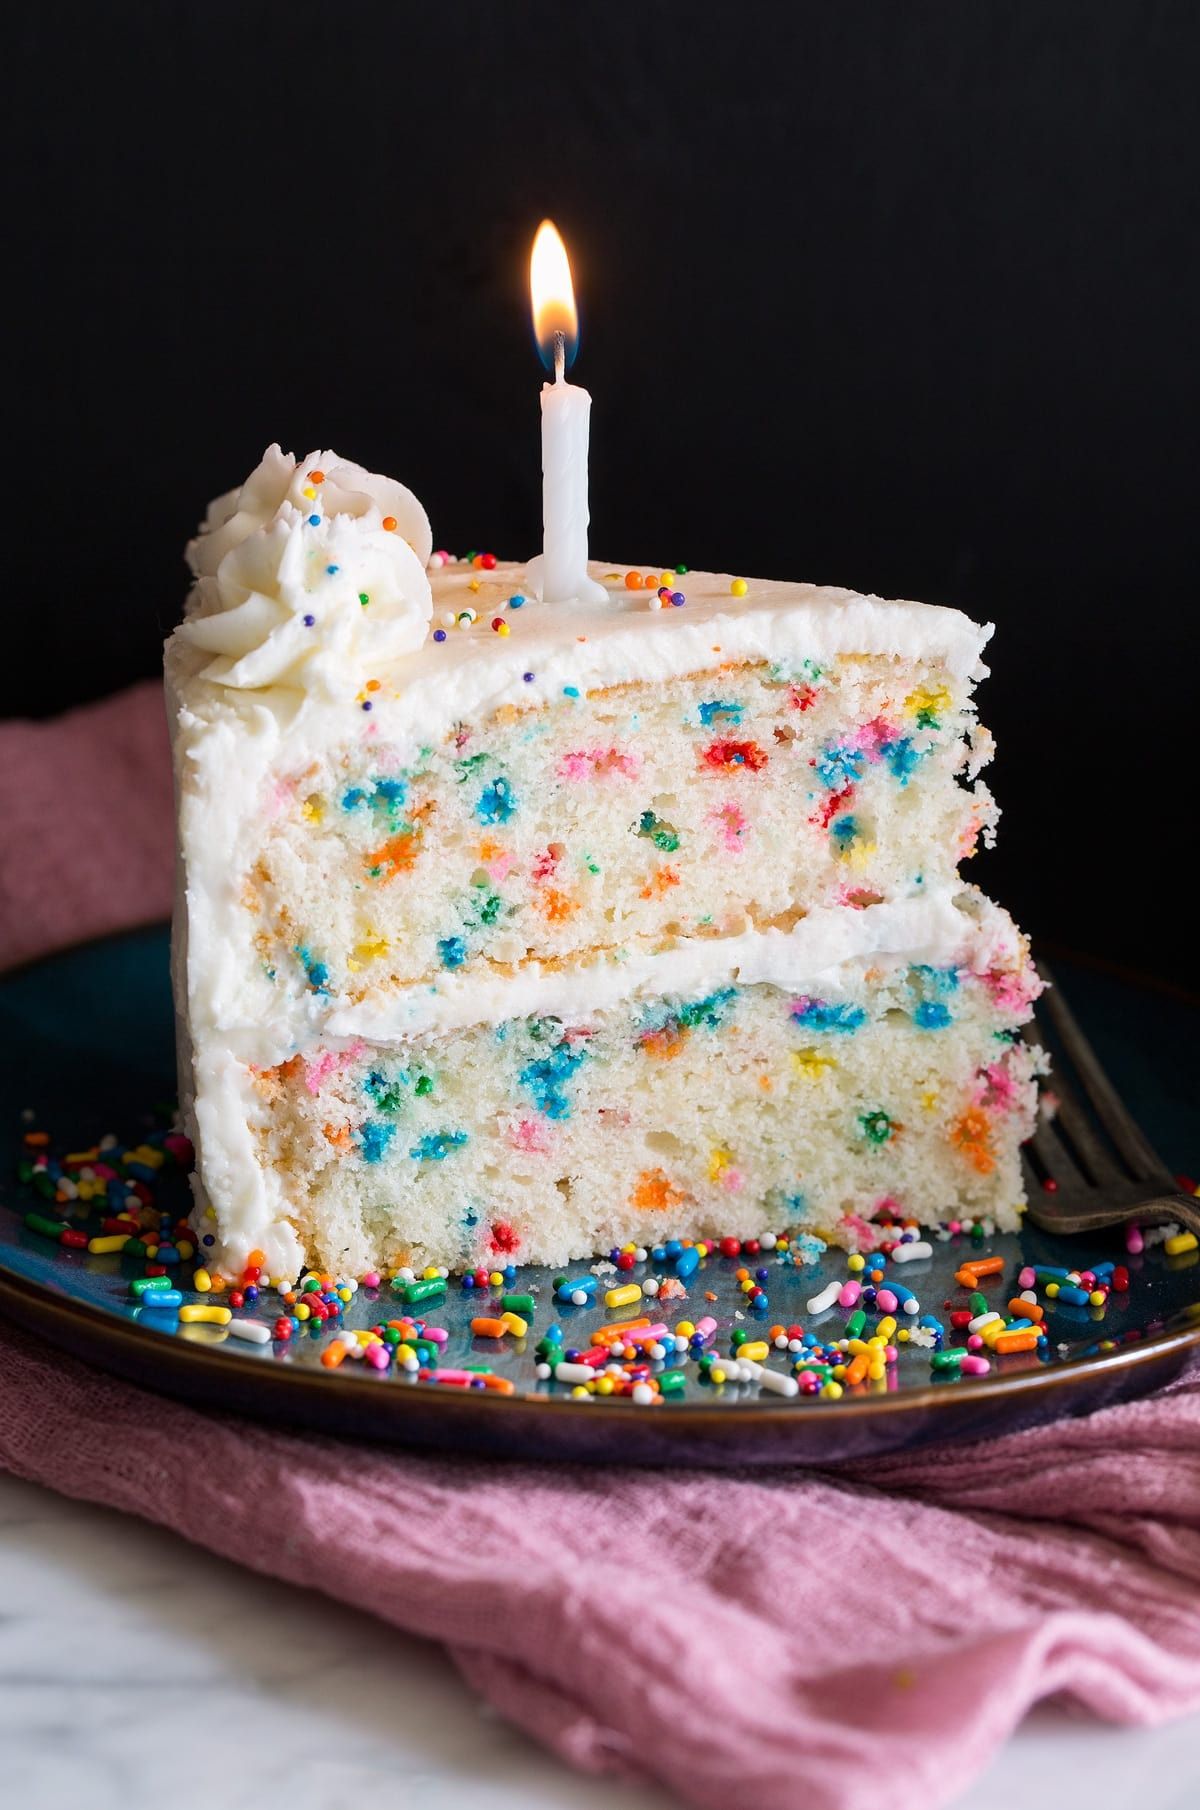 Jenne - Buttercream Cakes on Instagram: “Classic birthday cake designs in  shades of paste… | Birthday cake decorating, Cake designs birthday,  Buttercream decorating